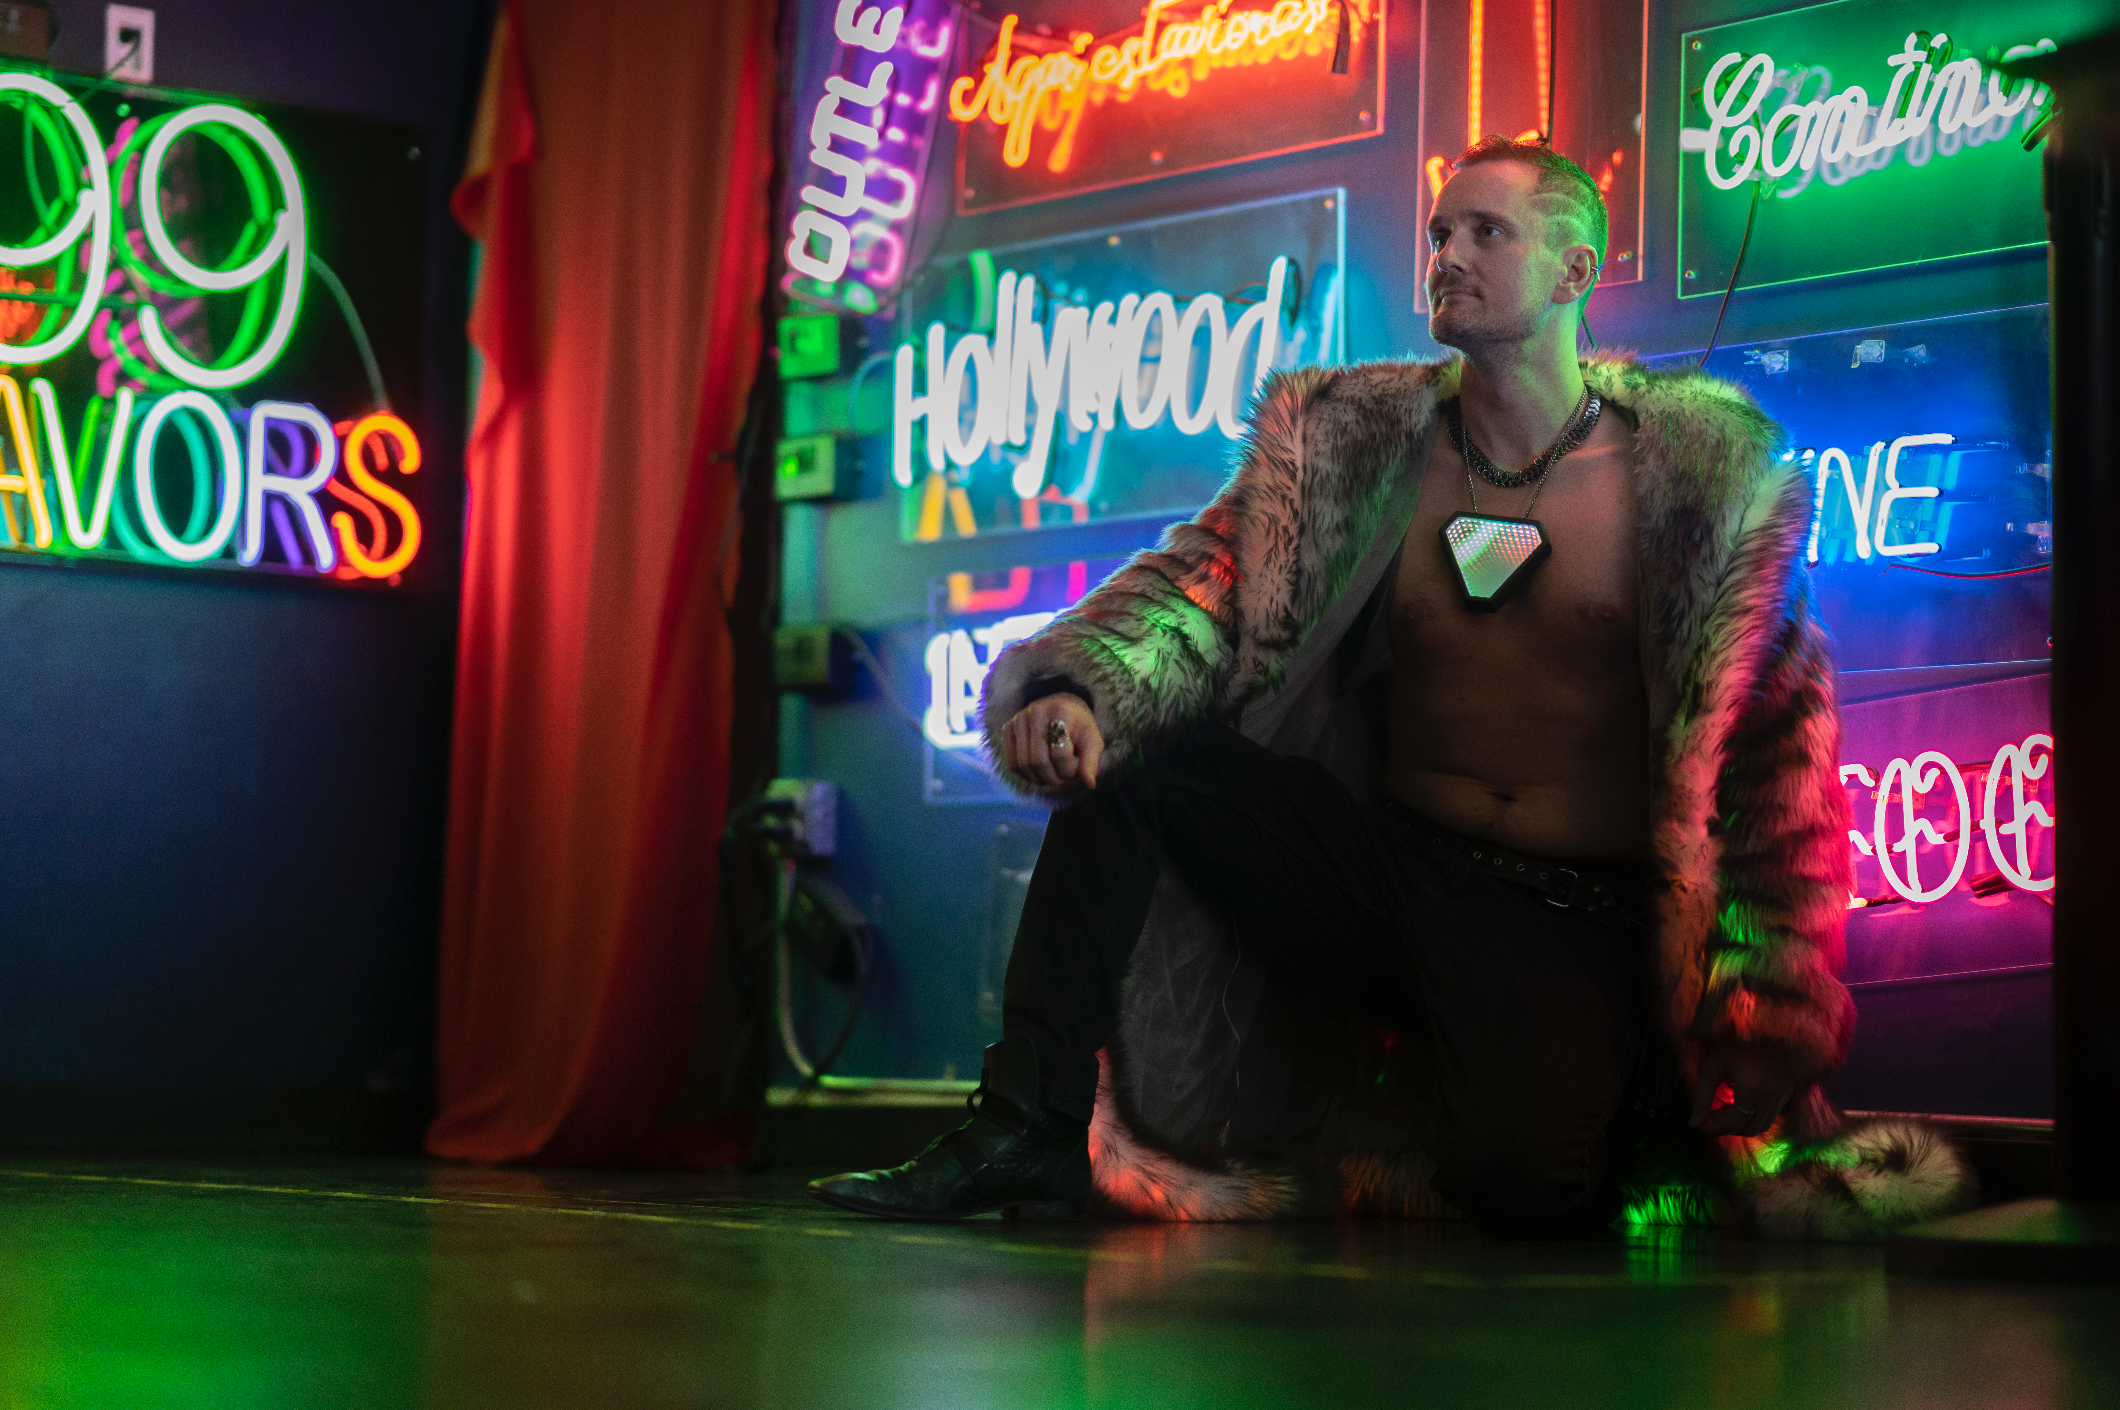 Portal's founder wearing the 'Prisma' infinity mirror necklace, posed in front of colorful neon signs